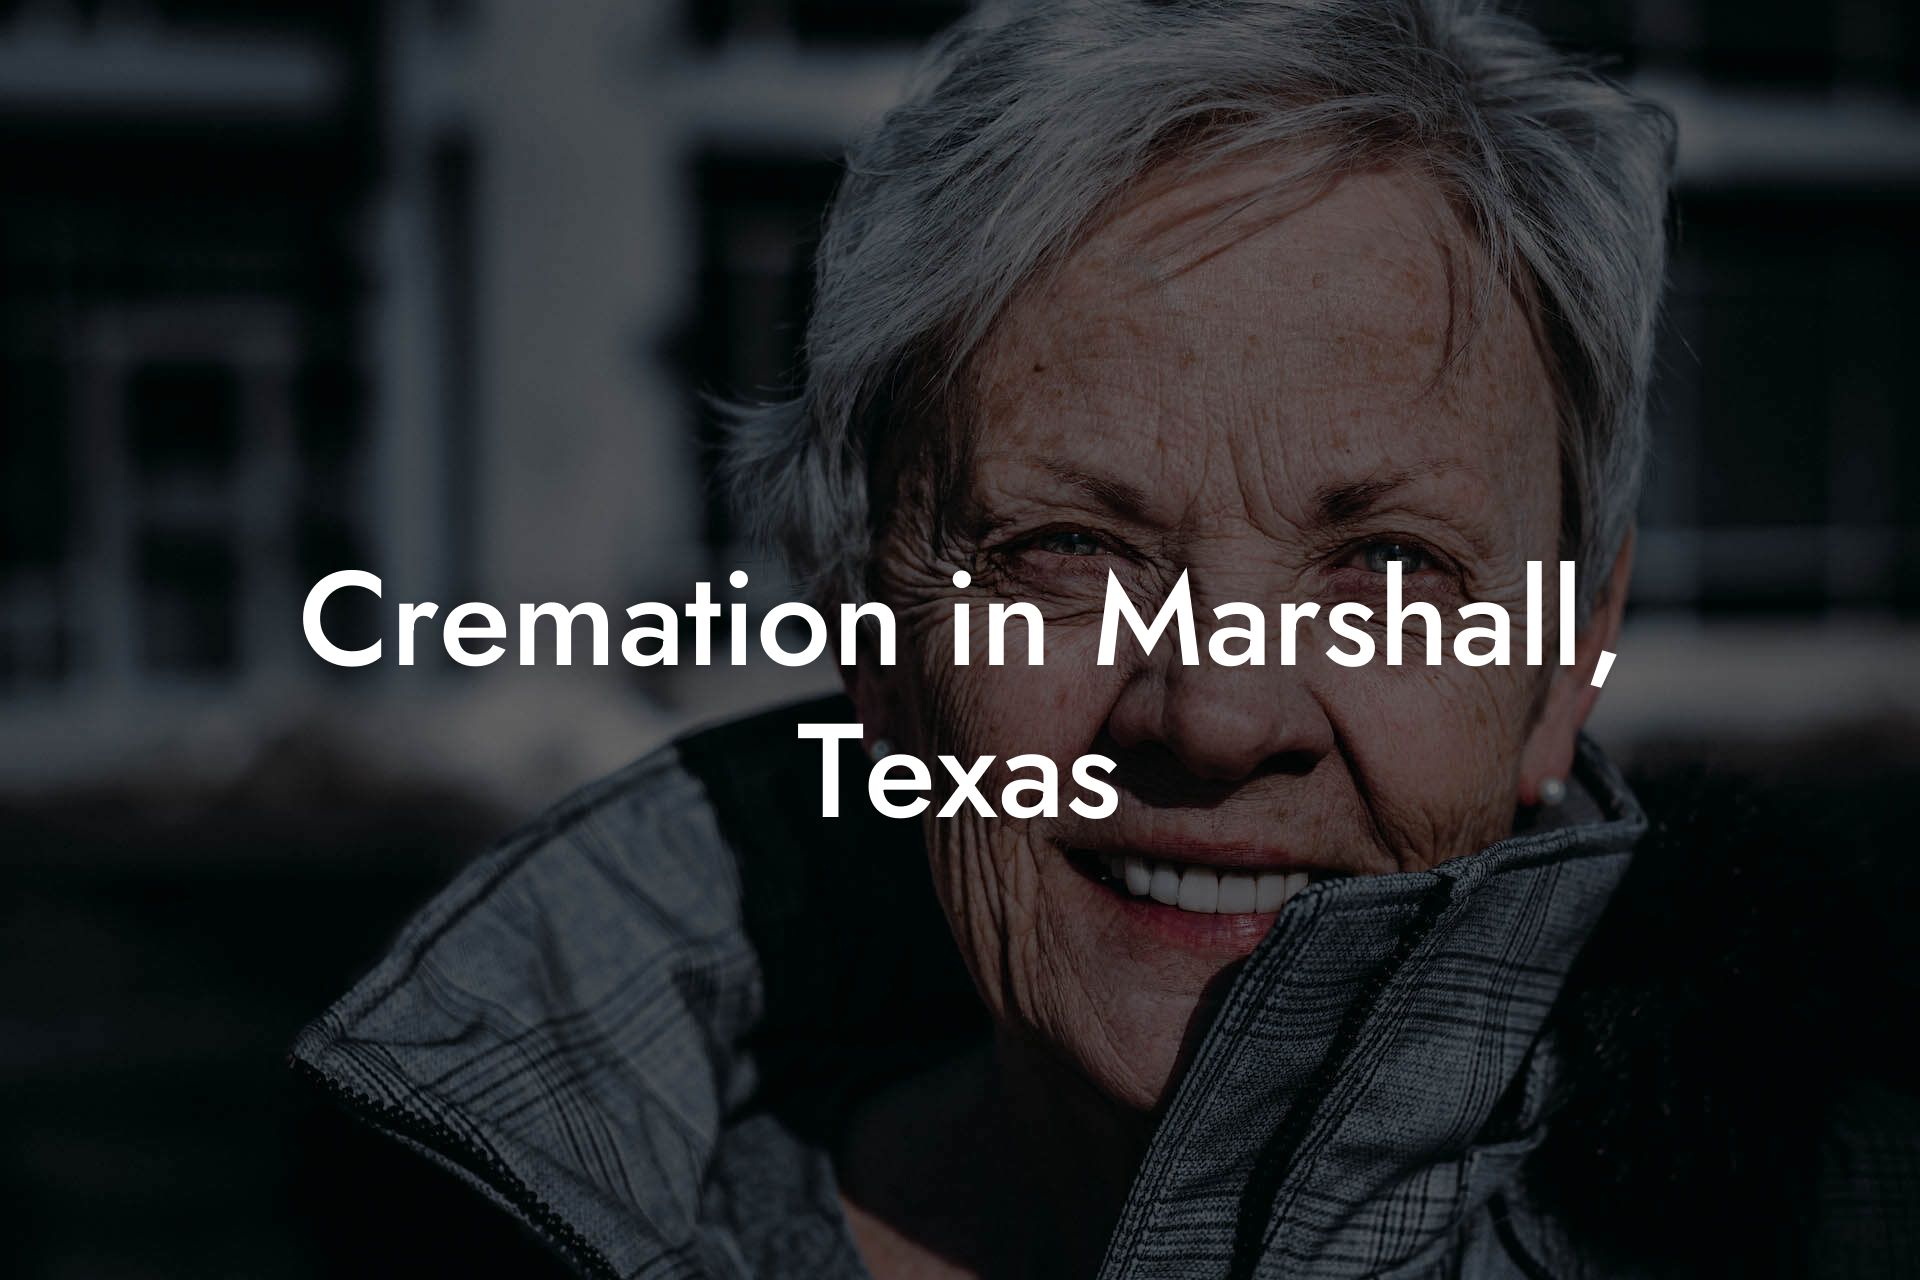 Cremation in Marshall, Texas